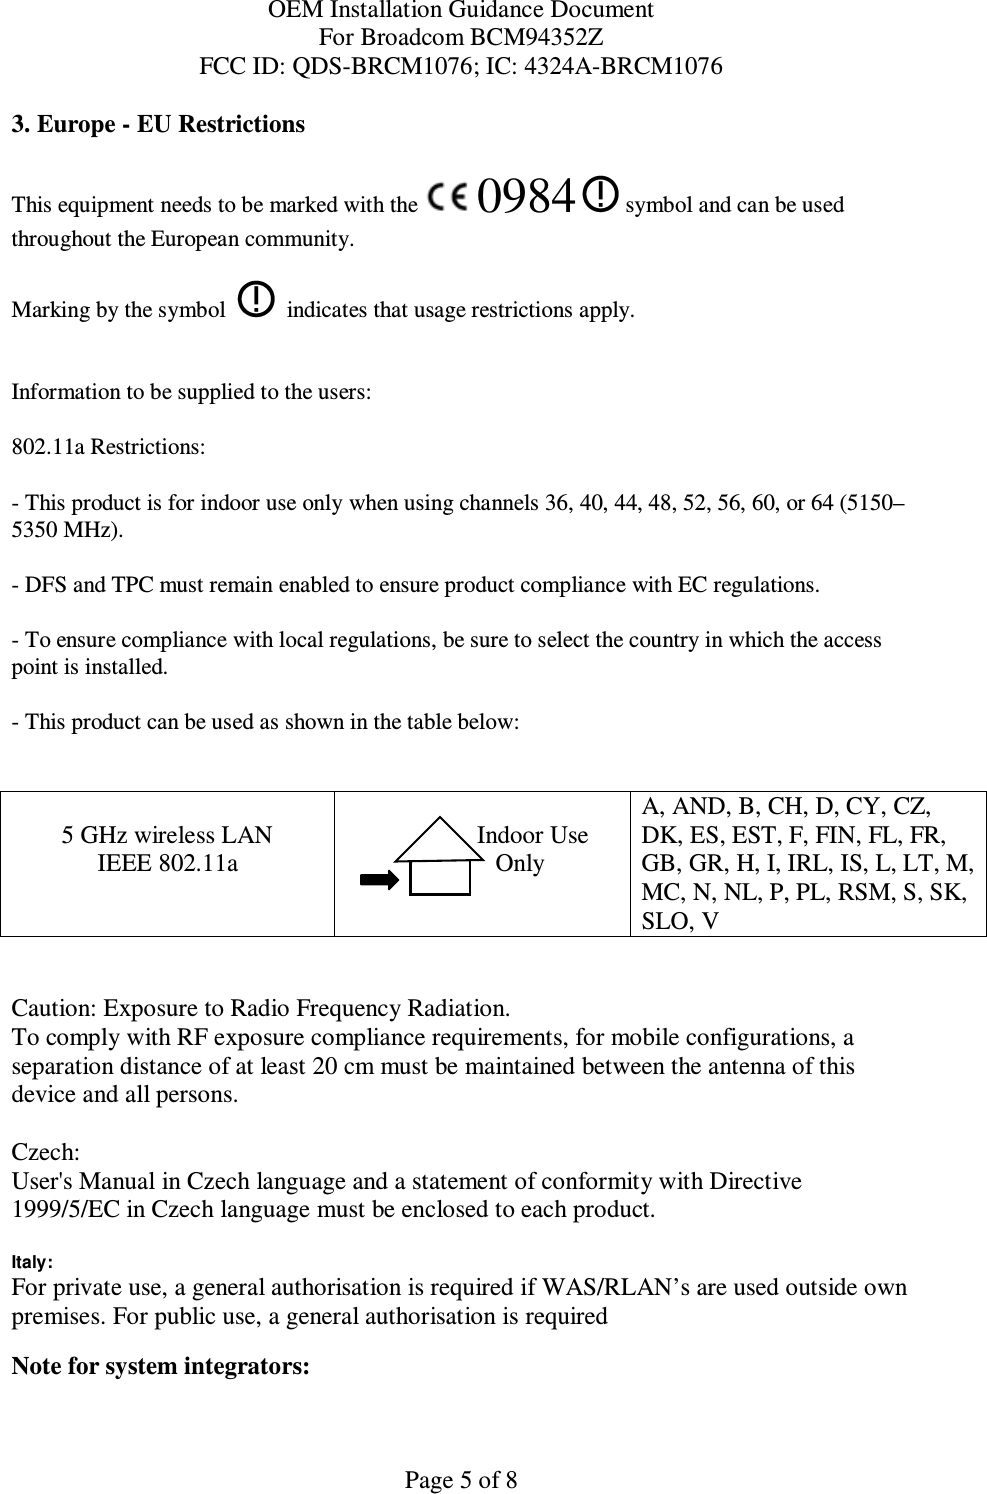 OEM Installation Guidance Document For Broadcom BCM94352Z FCC ID: QDS-BRCM1076; IC: 4324A-BRCM1076  Page 5 of 8 3. Europe - EU Restrictions This equipment needs to be marked with the   0984   symbol and can be used throughout the European community.  Marking by the symbol     indicates that usage restrictions apply.  Information to be supplied to the users: 802.11a Restrictions: - This product is for indoor use only when using channels 36, 40, 44, 48, 52, 56, 60, or 64 (5150–5350 MHz).       - DFS and TPC must remain enabled to ensure product compliance with EC regulations.      - To ensure compliance with local regulations, be sure to select the country in which the access point is installed. - This product can be used as shown in the table below:   5 GHz wireless LAN IEEE 802.11a                  Indoor Use             Only  A, AND, B, CH, D, CY, CZ, DK, ES, EST, F, FIN, FL, FR, GB, GR, H, I, IRL, IS, L, LT, M, MC, N, NL, P, PL, RSM, S, SK, SLO, V   Caution: Exposure to Radio Frequency Radiation.   To comply with RF exposure compliance requirements, for mobile configurations, a separation distance of at least 20 cm must be maintained between the antenna of this device and all persons.  Czech:  User&apos;s Manual in Czech language and a statement of conformity with Directive 1999/5/EC in Czech language must be enclosed to each product.   Italy:  For private use, a general authorisation is required if WAS/RLAN’s are used outside own premises. For public use, a general authorisation is required  Note for system integrators:   